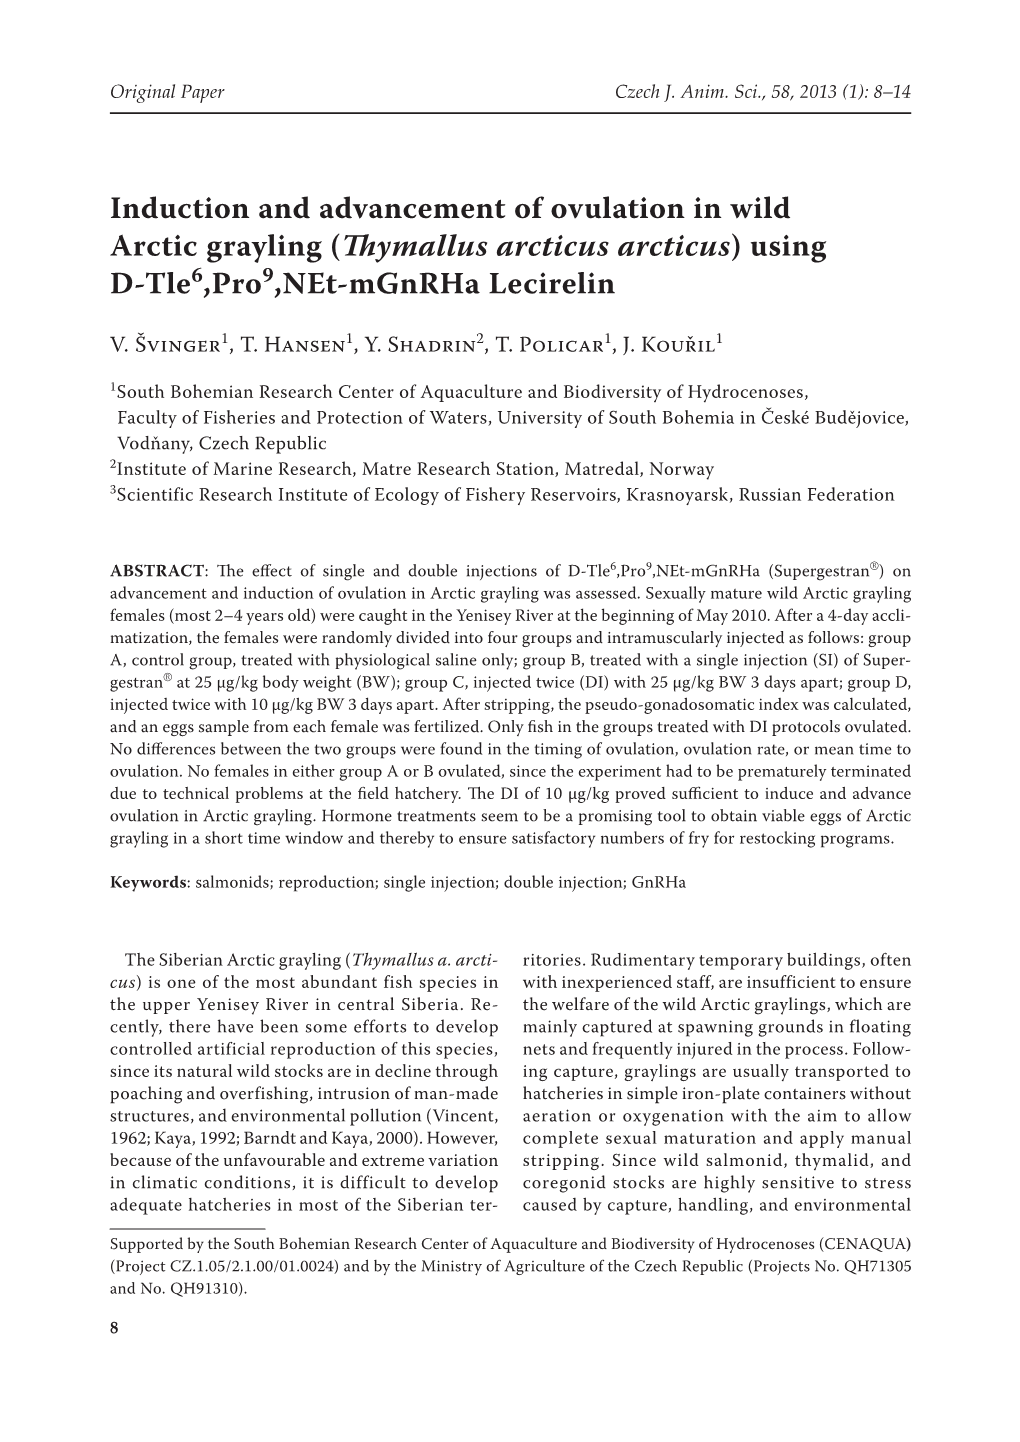 Induction and Advancement of Ovulation in Wild Arctic Grayling (Thymallus Arcticus Arcticus) Using D-Tle6,Pro9,Net-Mgnrha Lecirelin